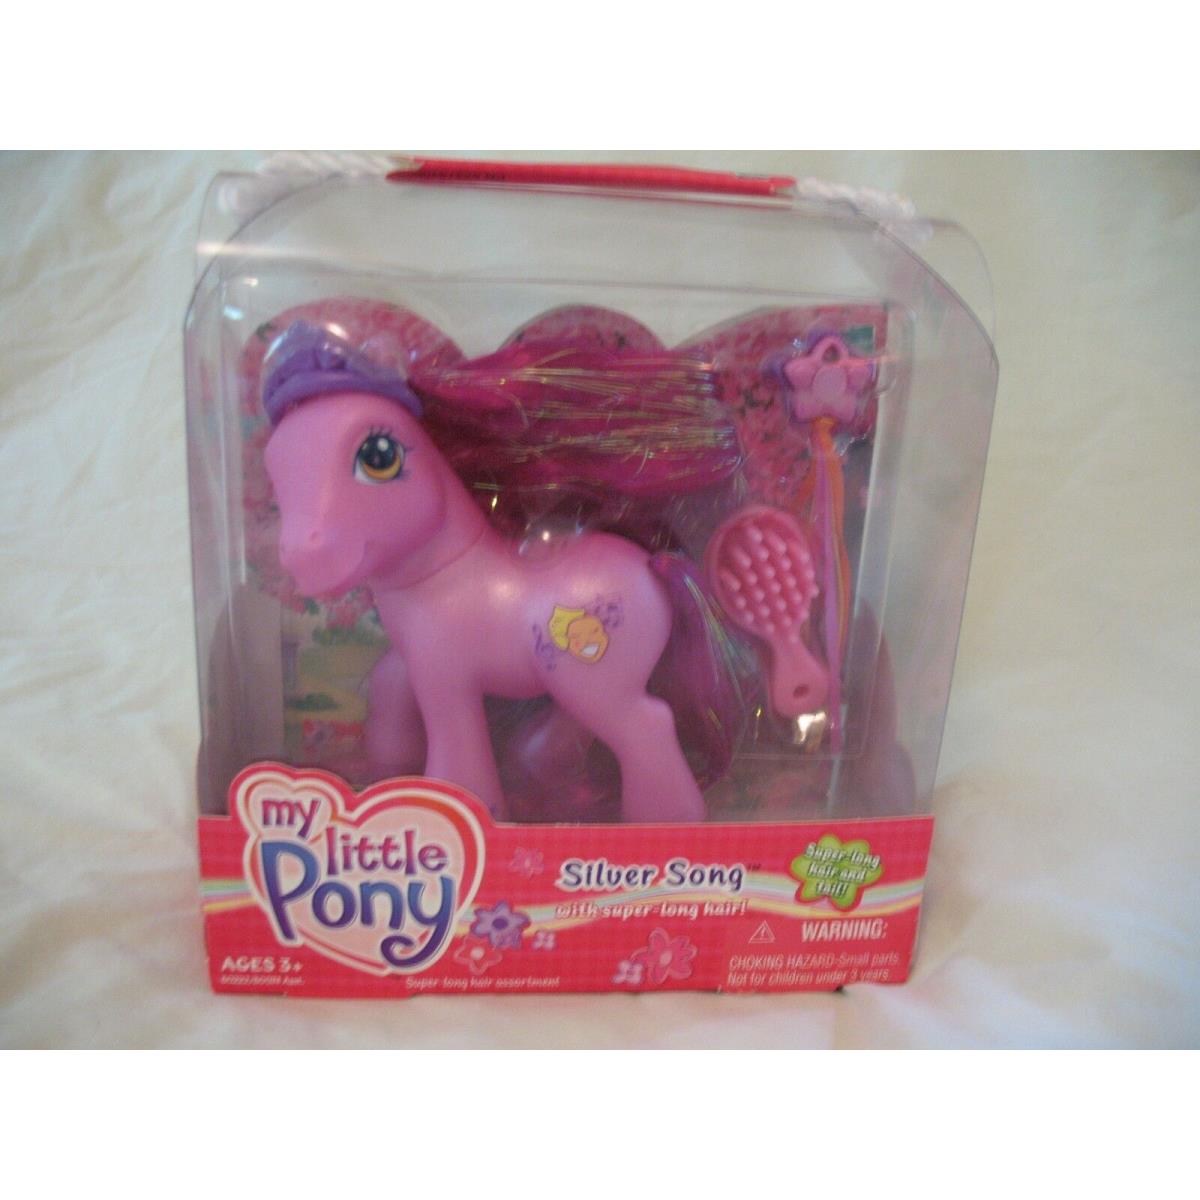 My Little Pony `silver Song` Beautiful G3 Release Super Long Hair